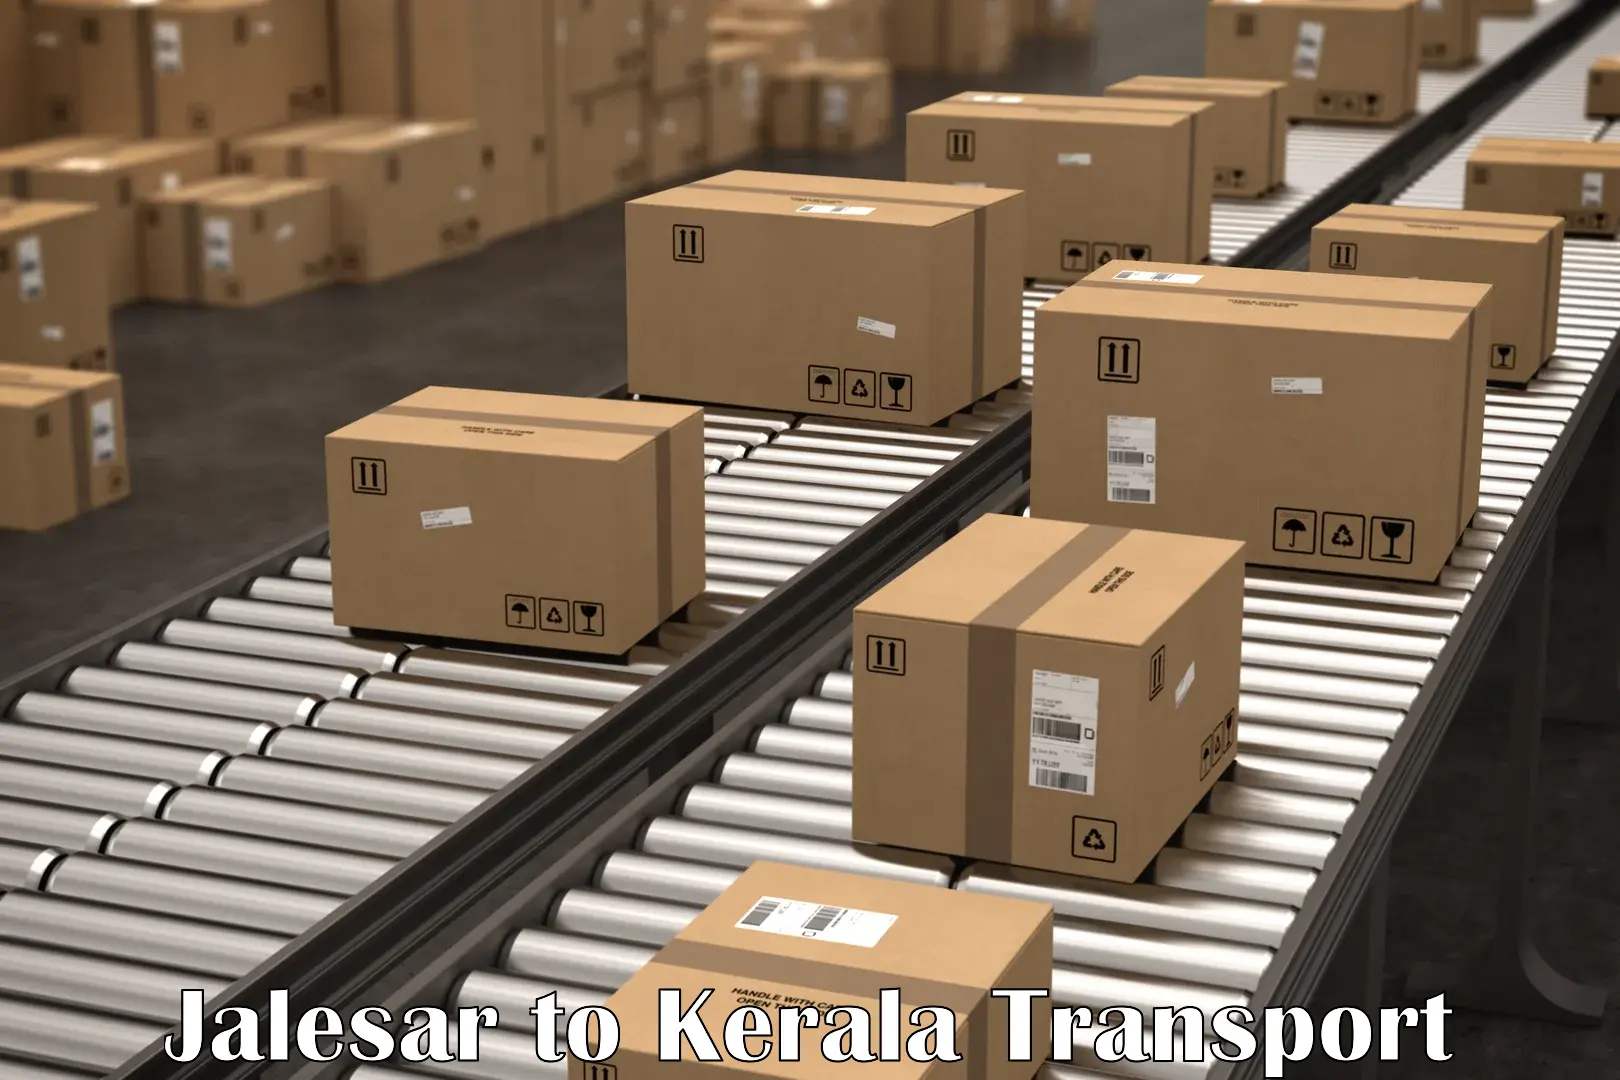 Goods delivery service Jalesar to Mahe